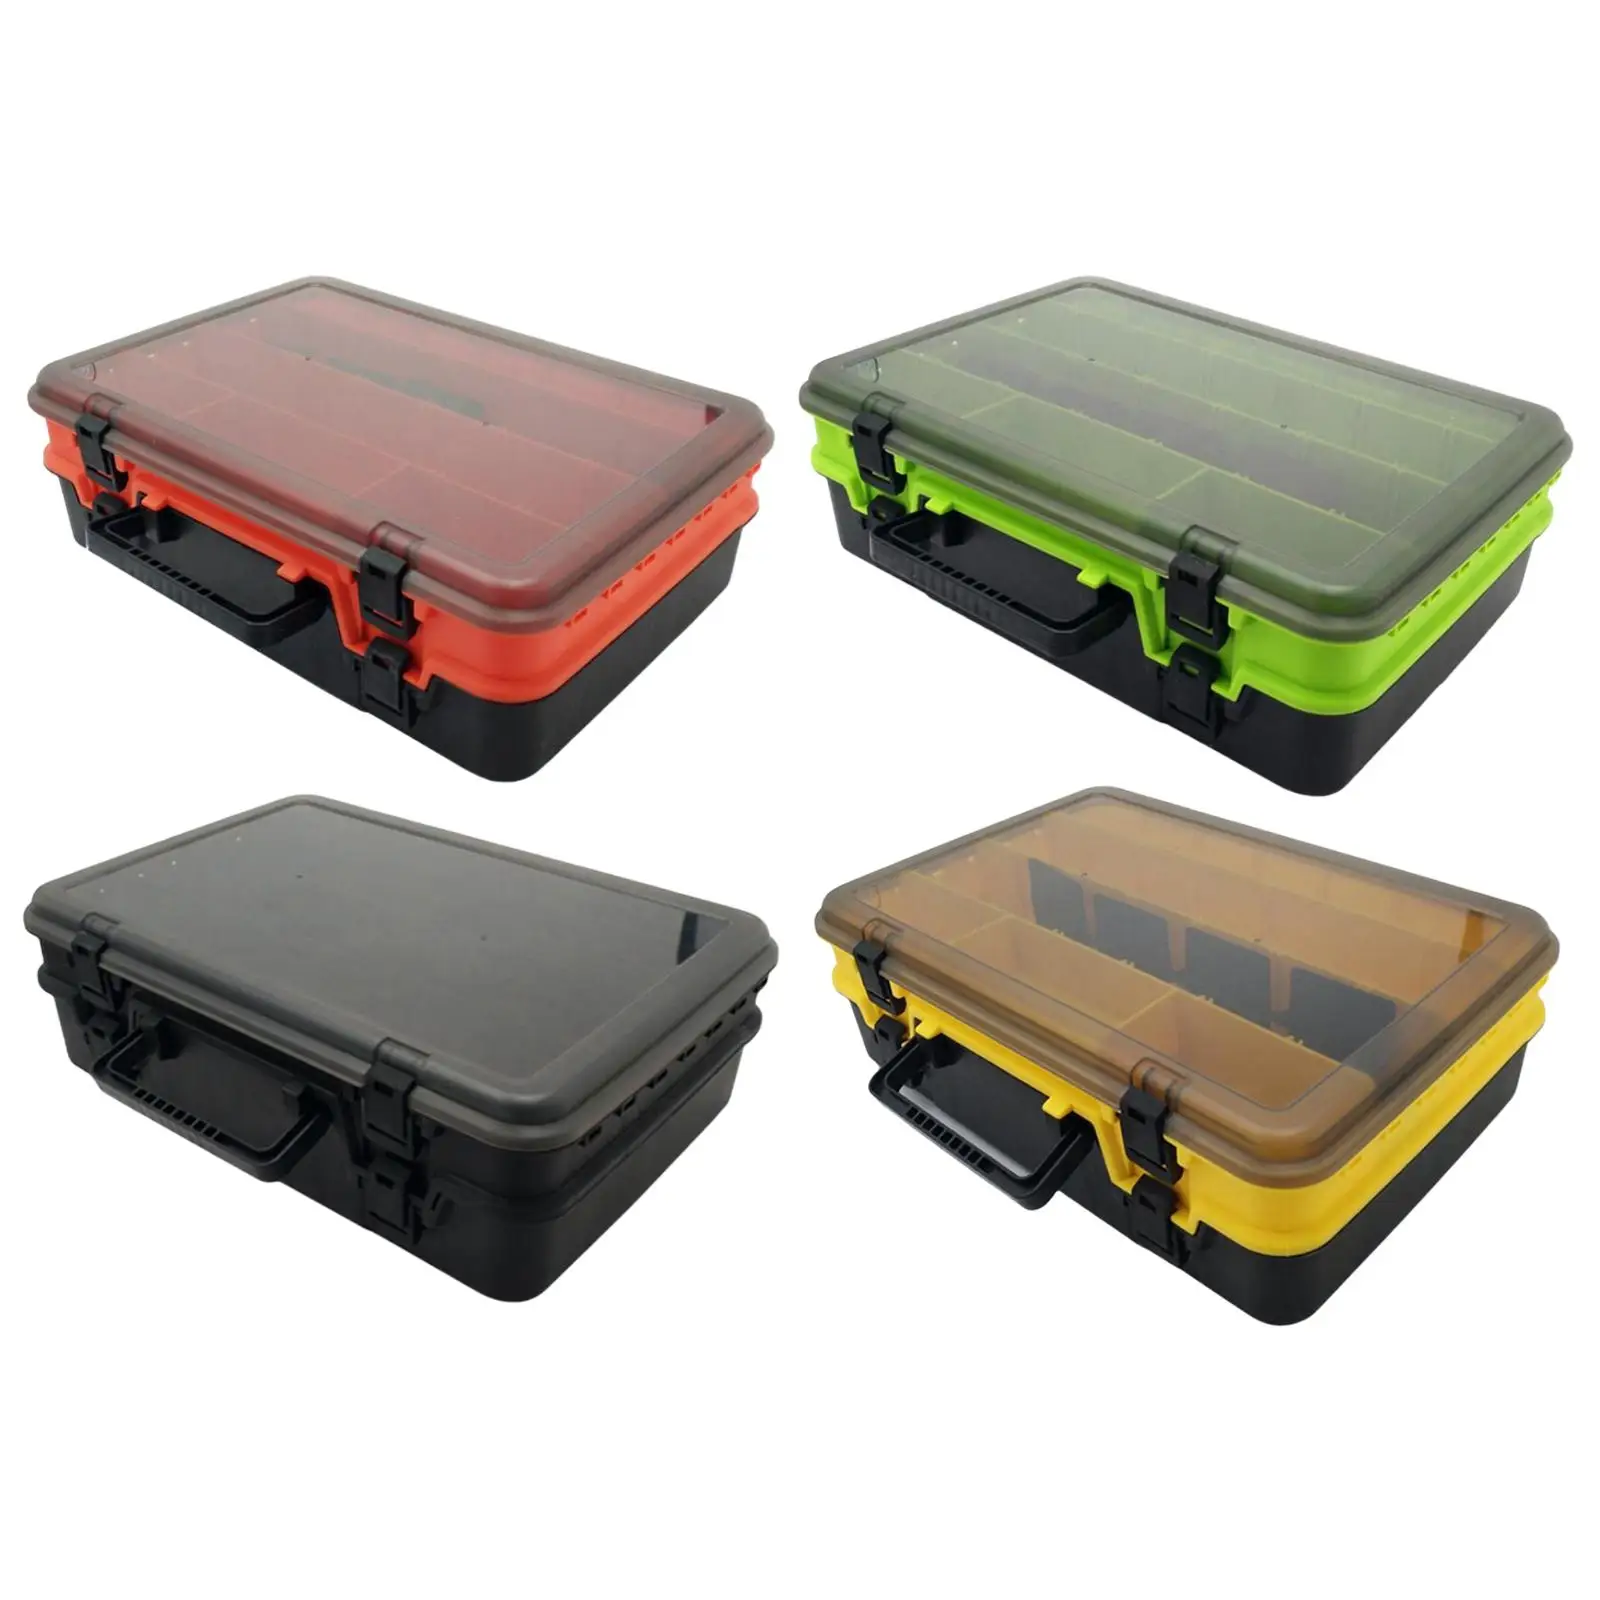 Multifunction Fishing Tackle Box 2 Layer with Adjustable Dividers Organizer for Beads Fishing Reel Fresh Water Spinners Hooks